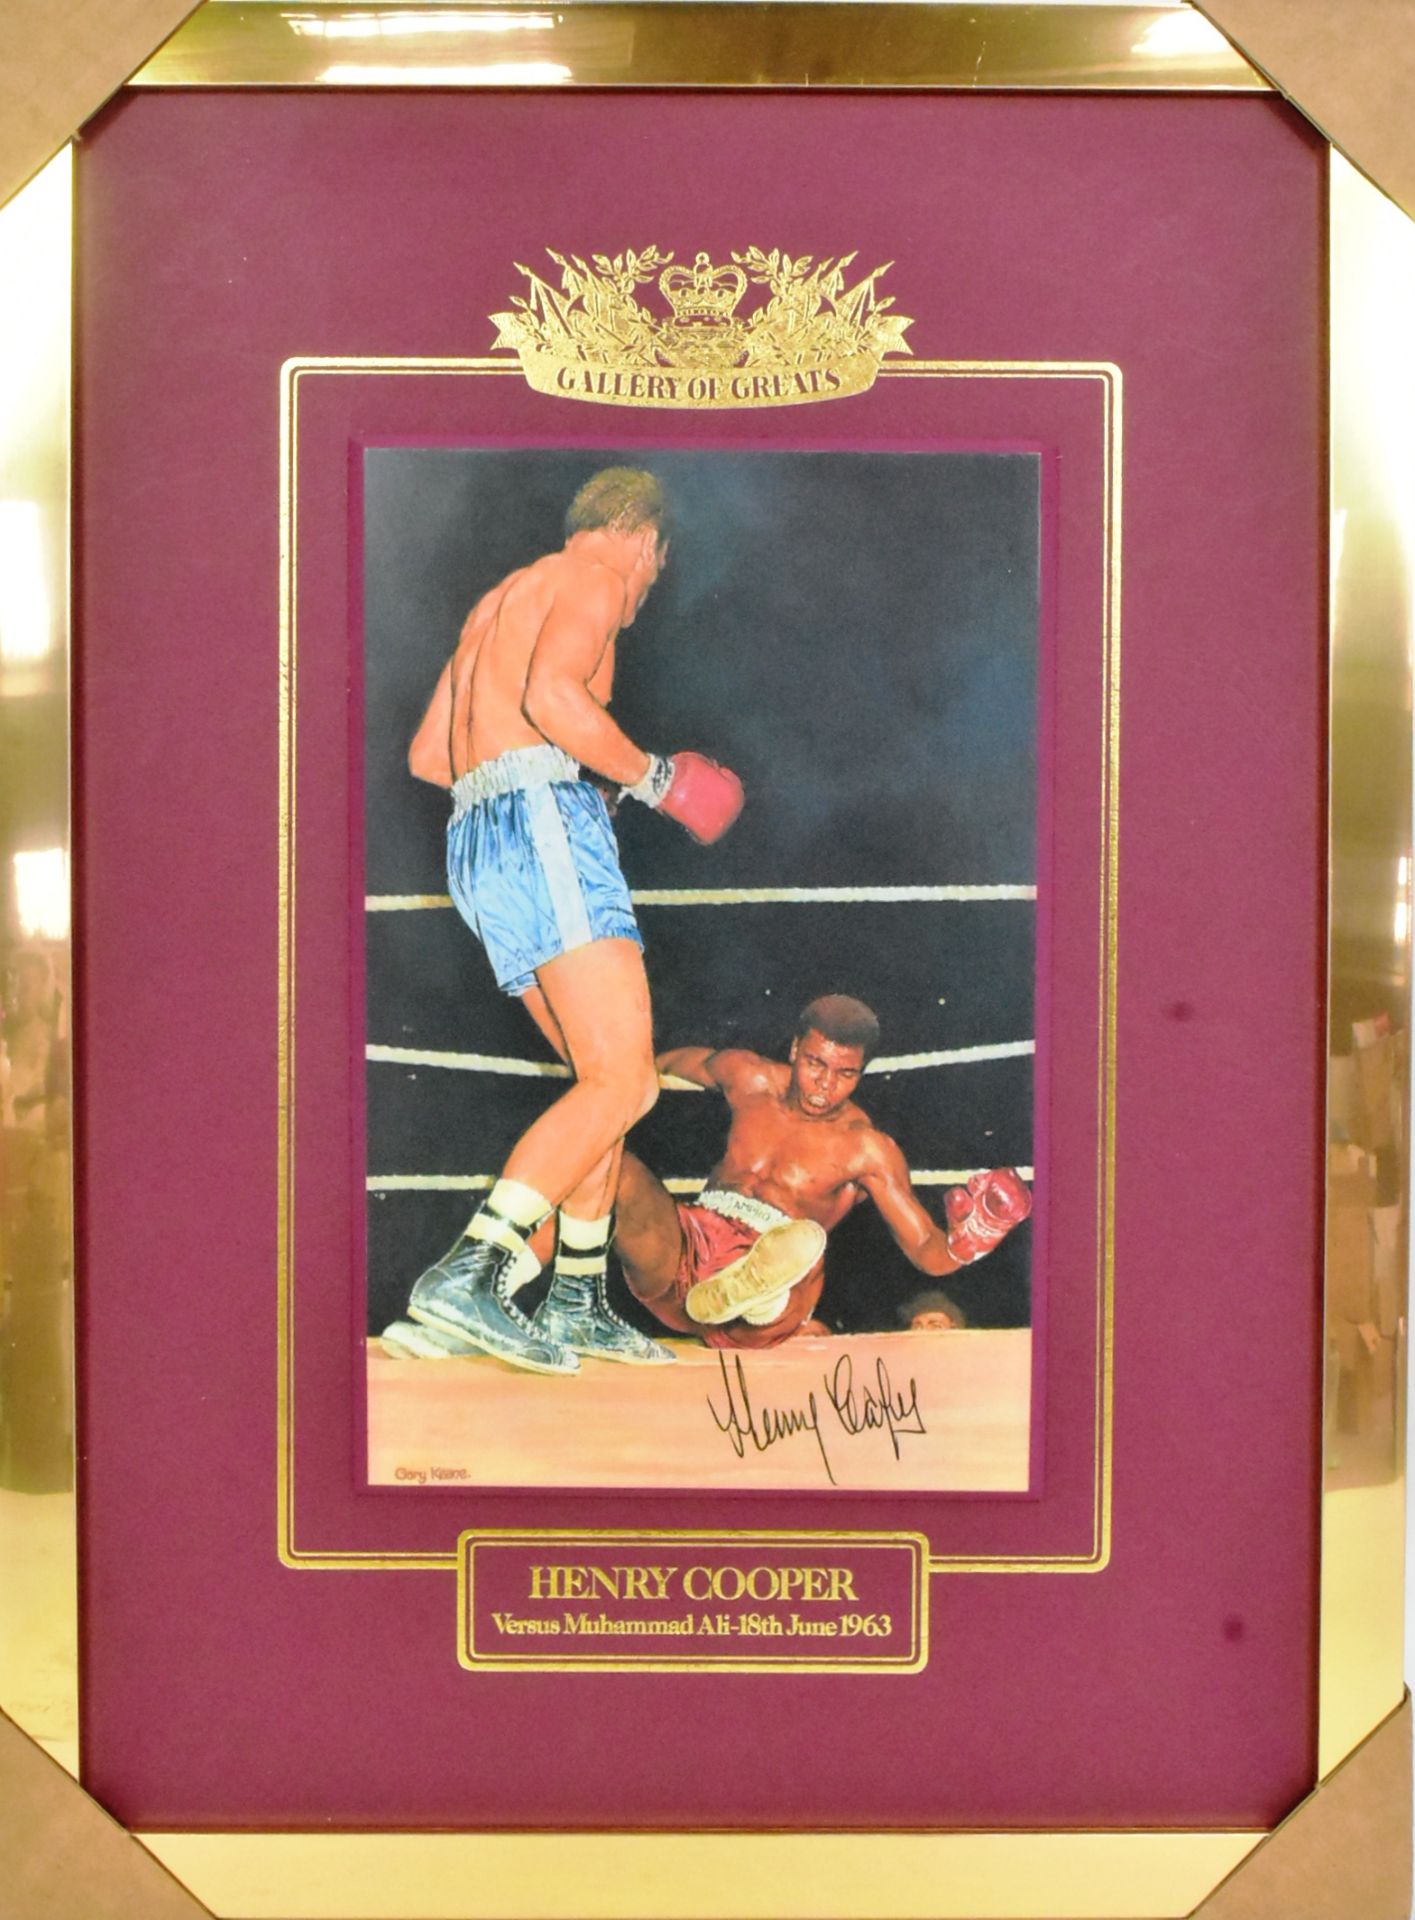 BOXING INTEREST - SIR HENRY COOPER - AUTOGRAPHED PRINT - Image 2 of 4